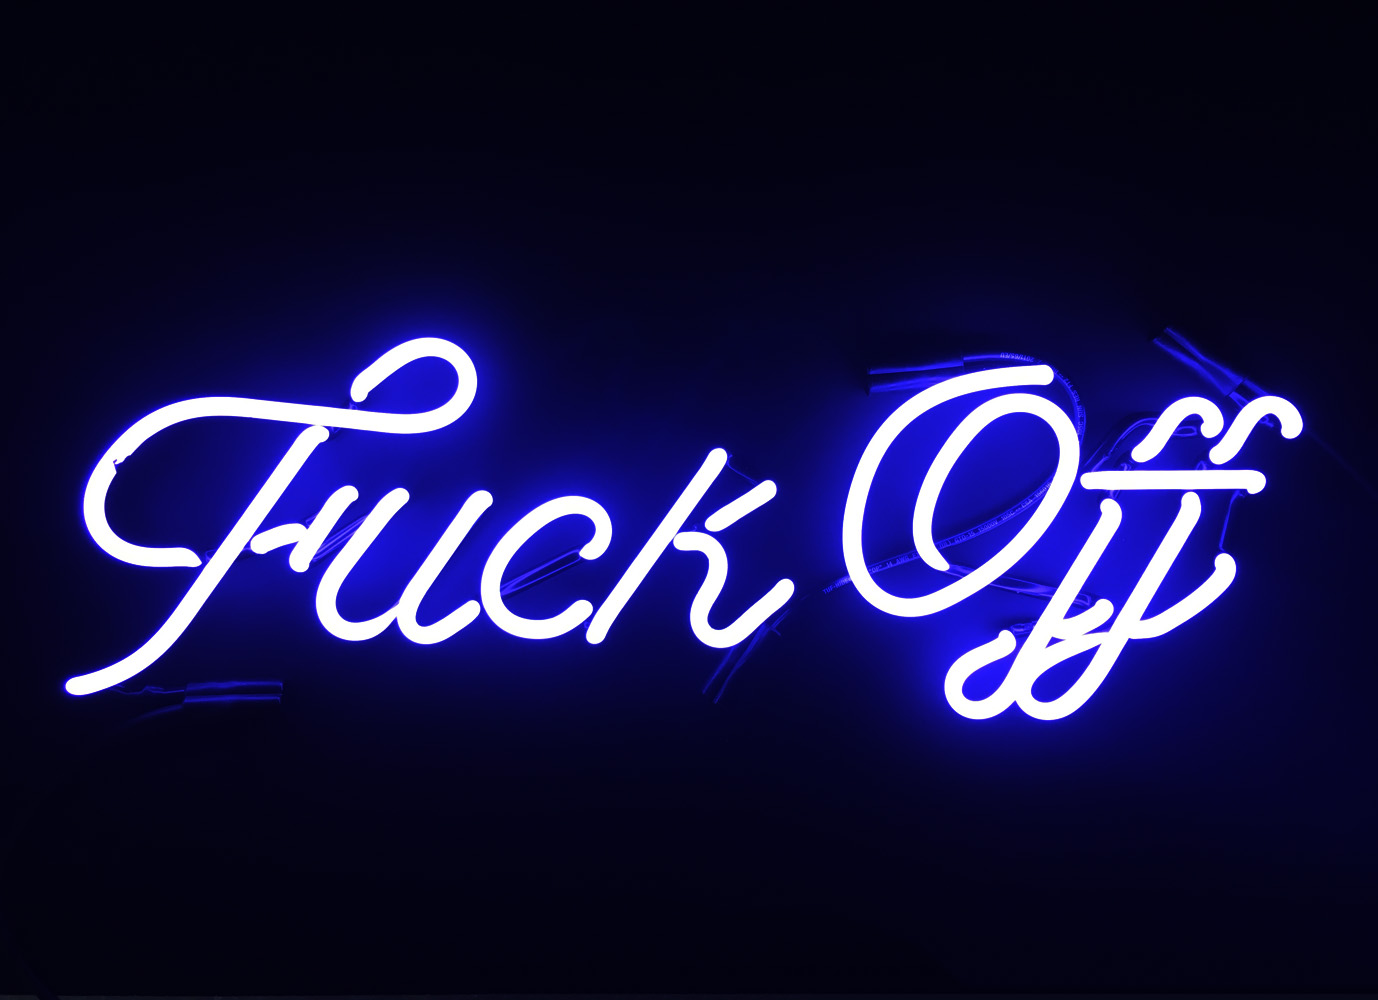 Indira-Cesarine-FUCK-OFF-blue-neon-THE-UNTITLED-SPACE-UPRISE-ANGRY-WOMEN-EXHIBIT-lowres-copy-2.jpg